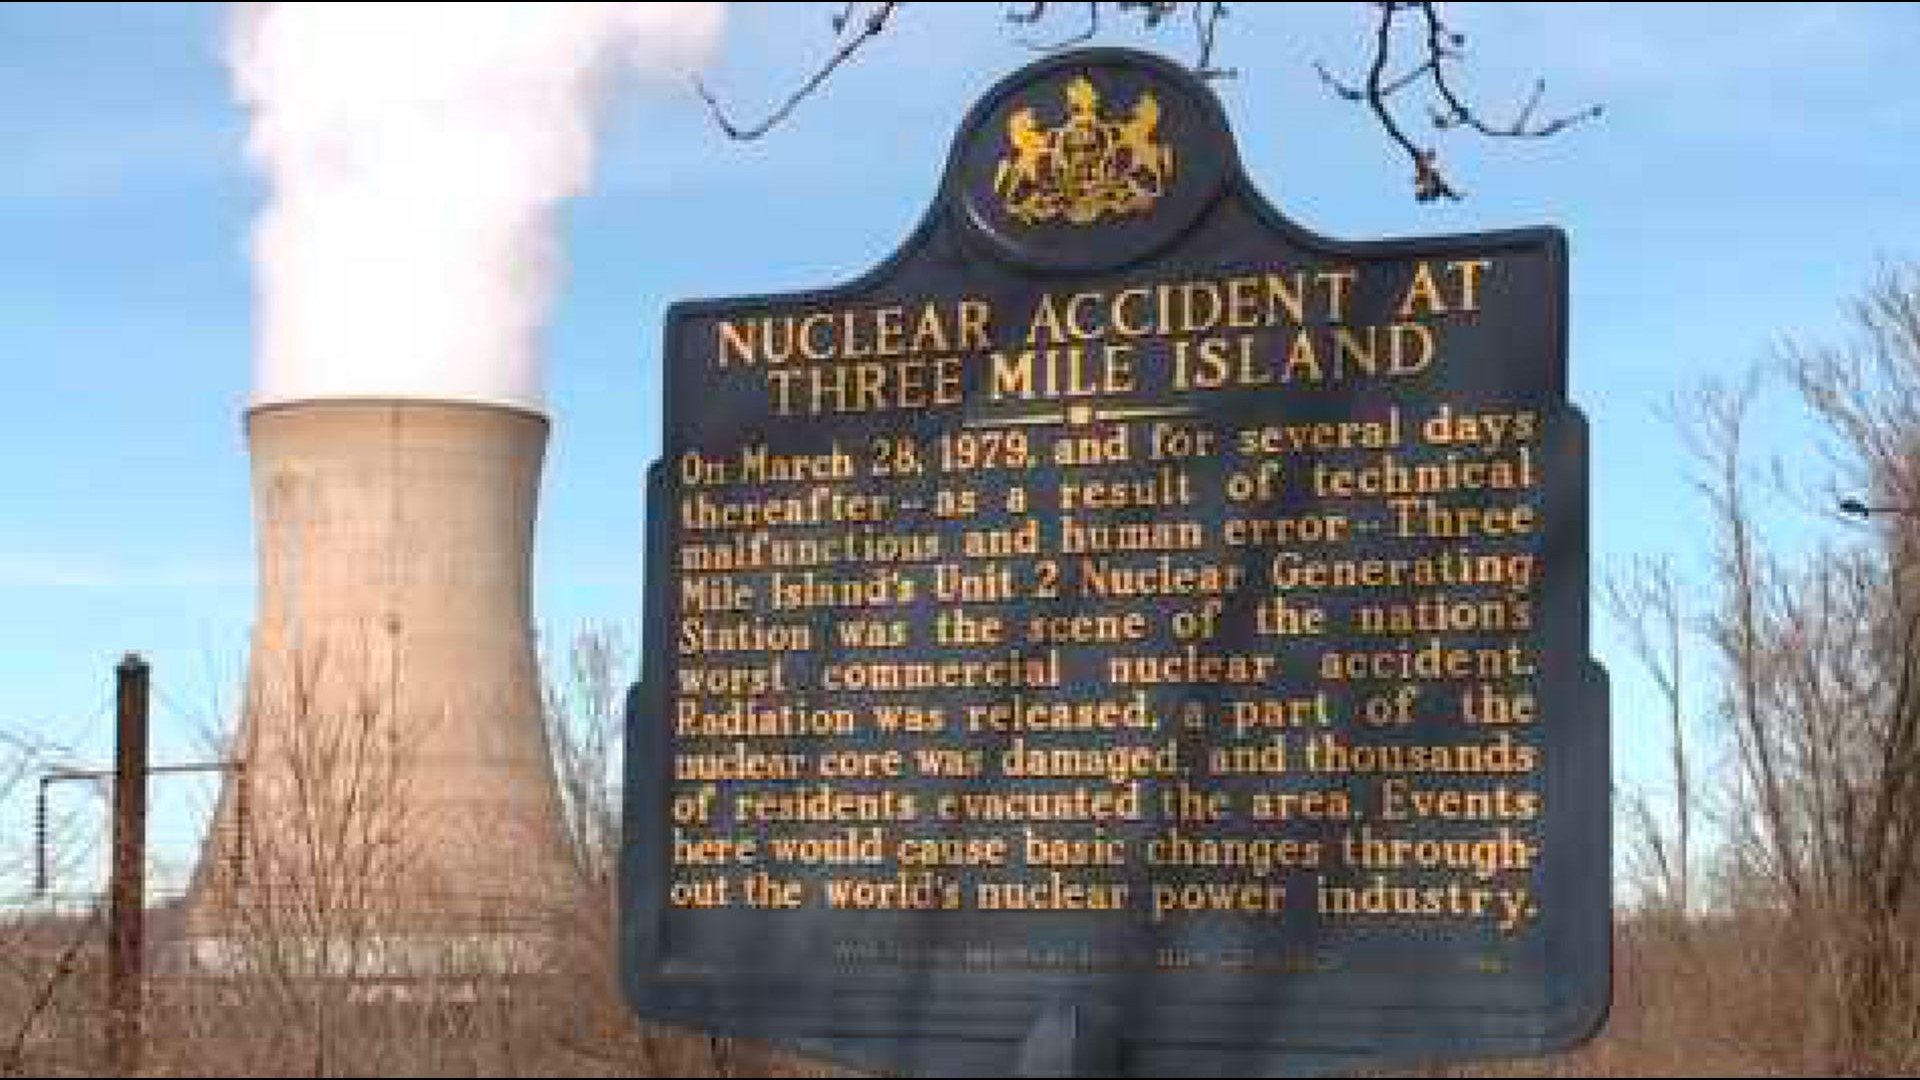 Three Mile Island partial meltdown forever changes nuclear industry